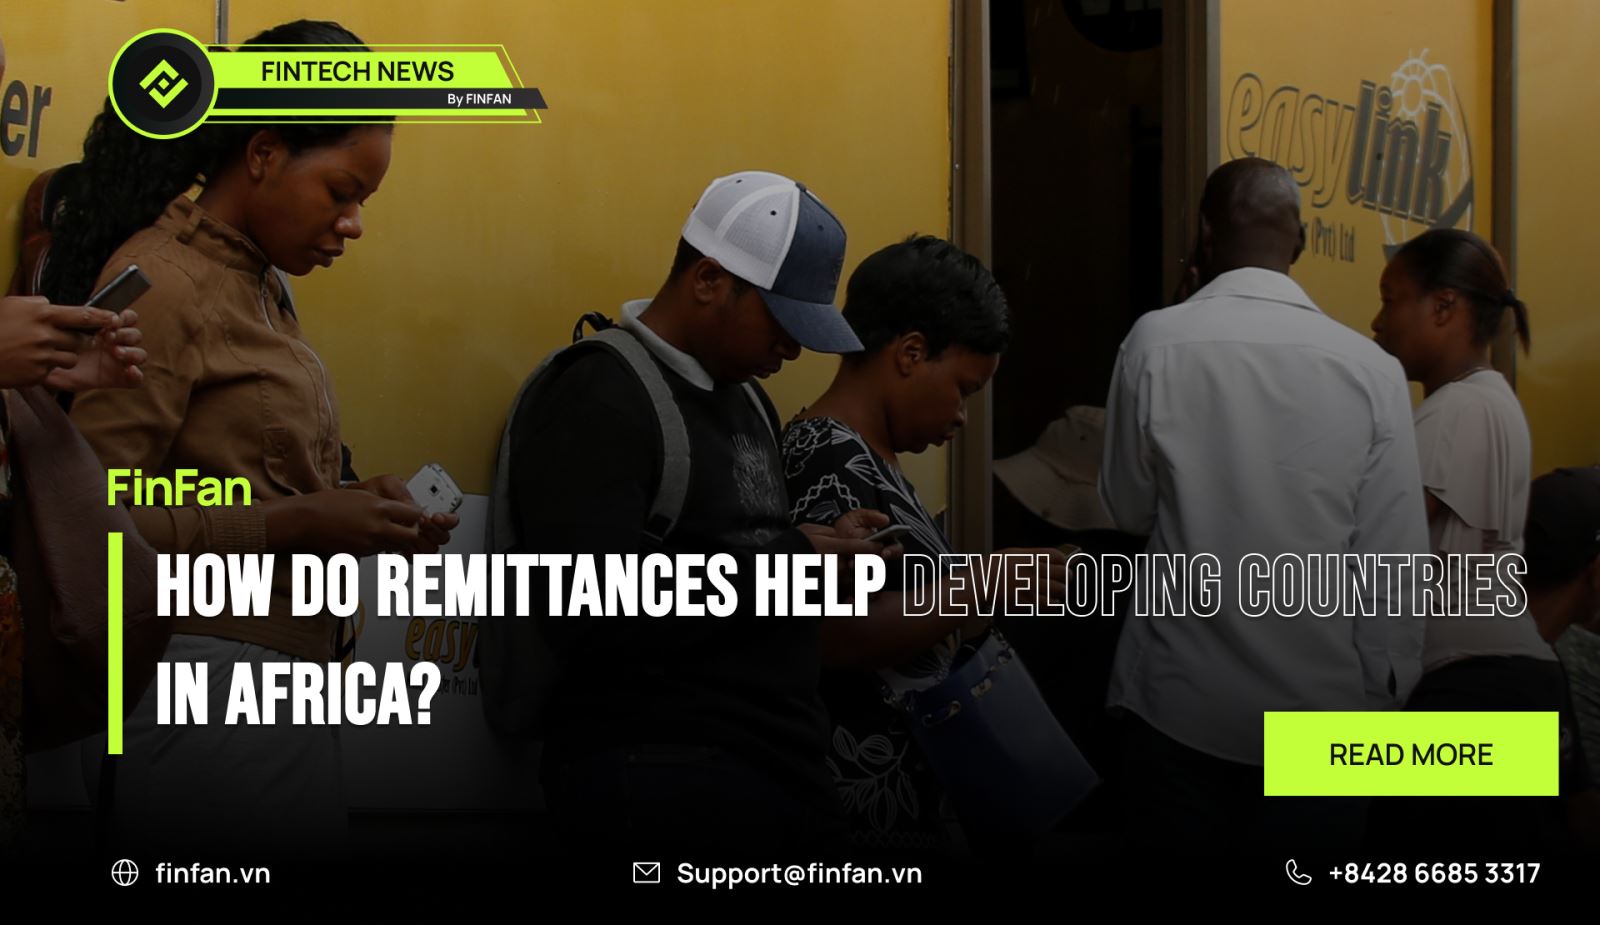 How do remittances help developing countries in Africa?